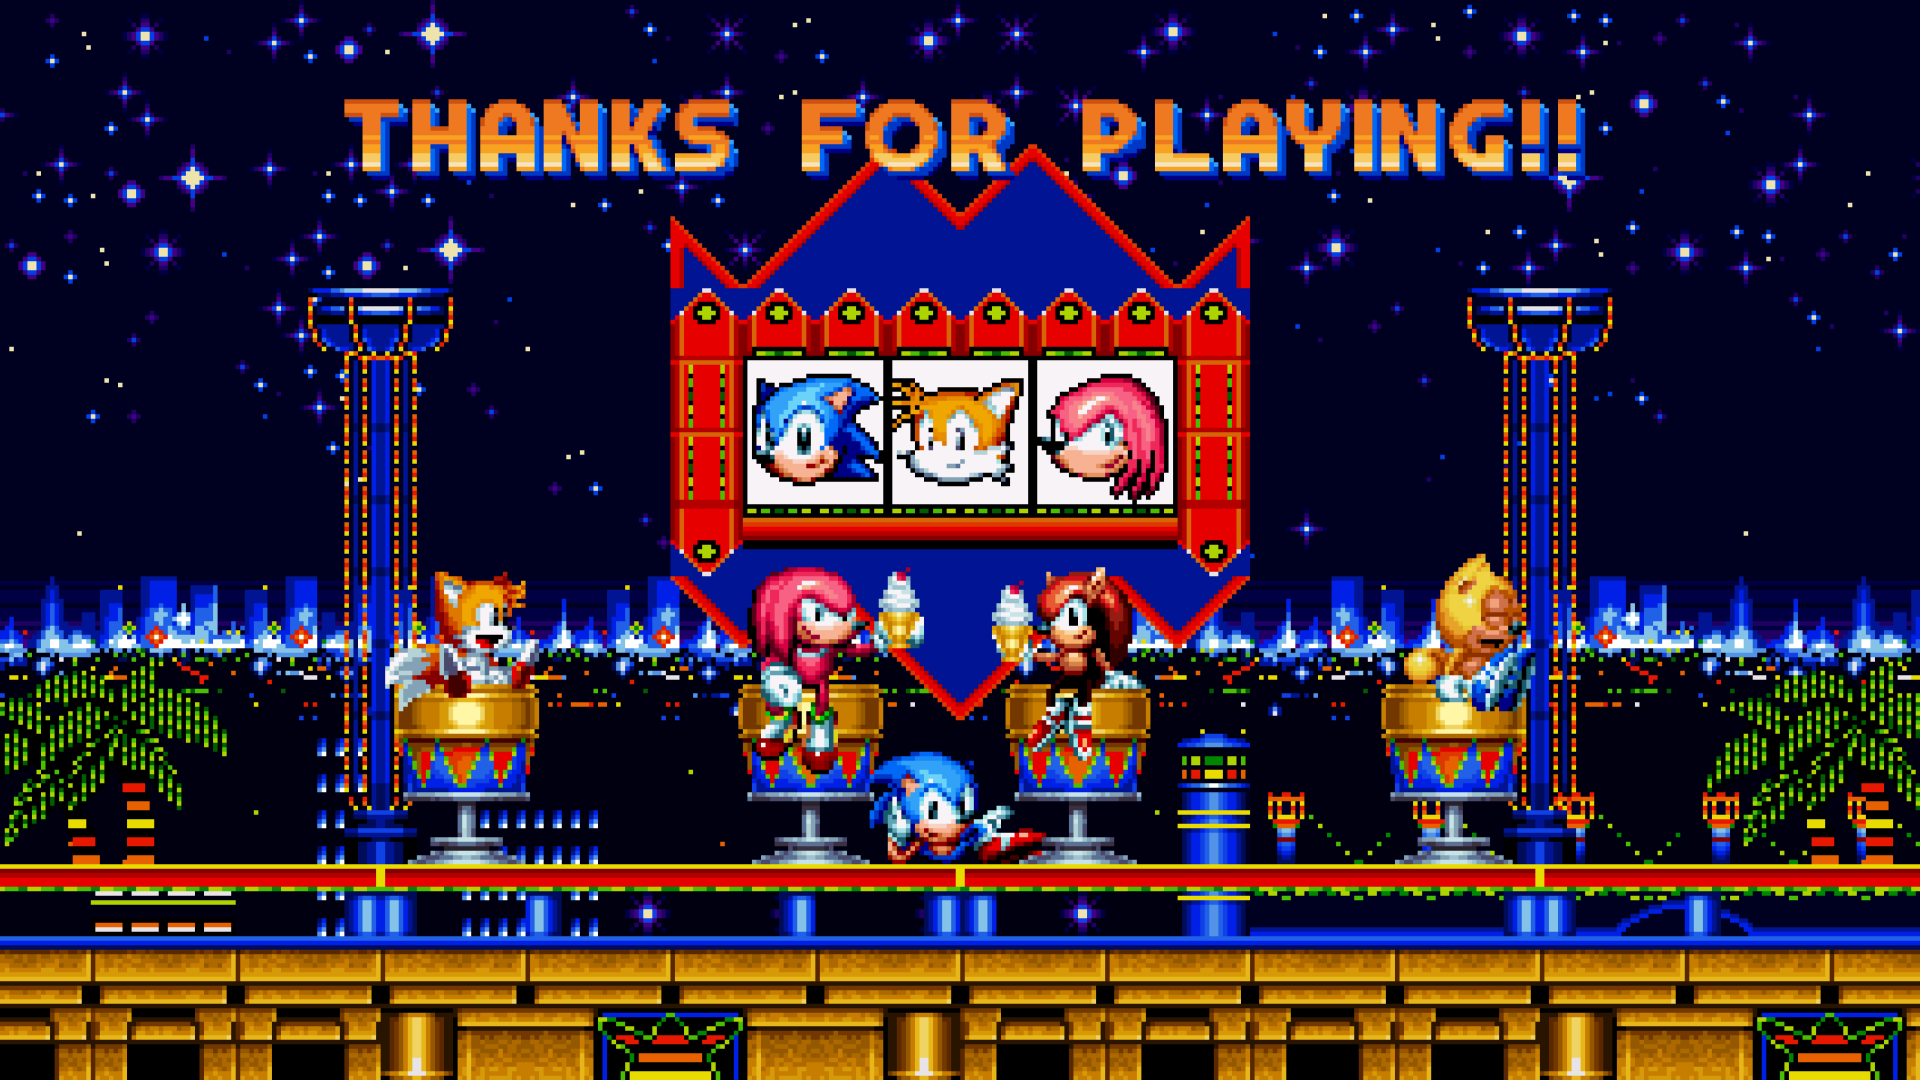 Sonic Mania 2 - TopTwitchStreamers